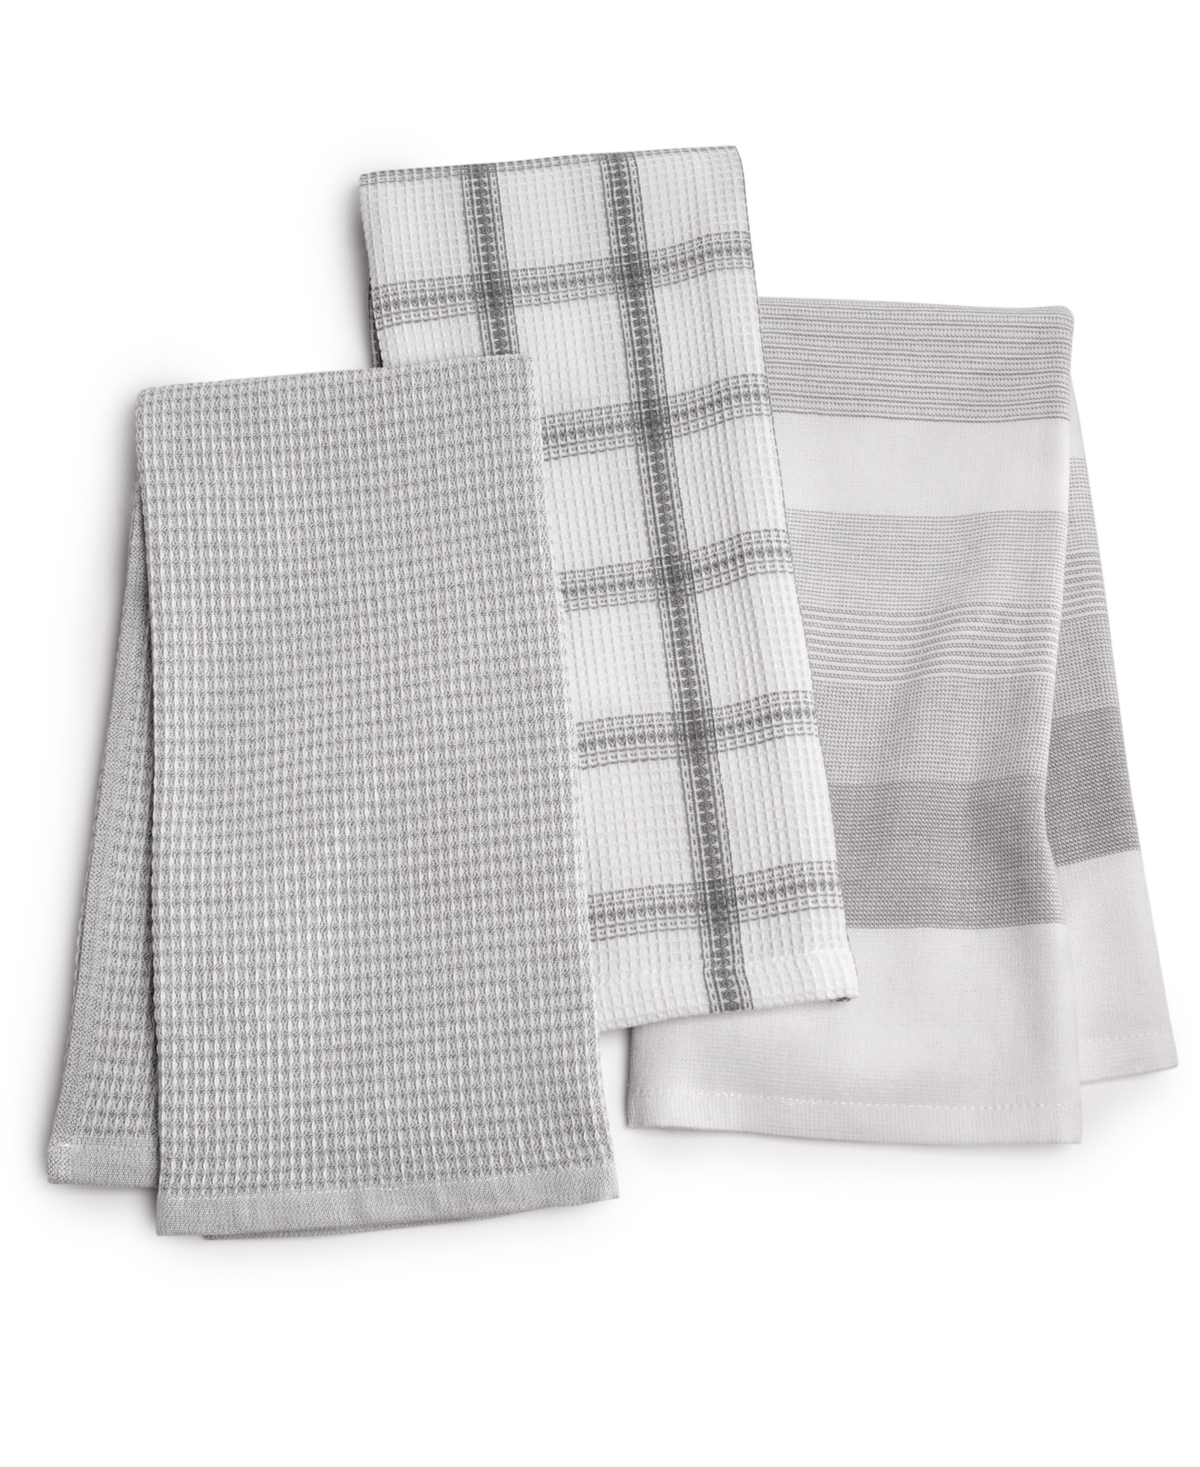 Core 3-Pc. Cotton Gray Towels Set, Created for Macy's